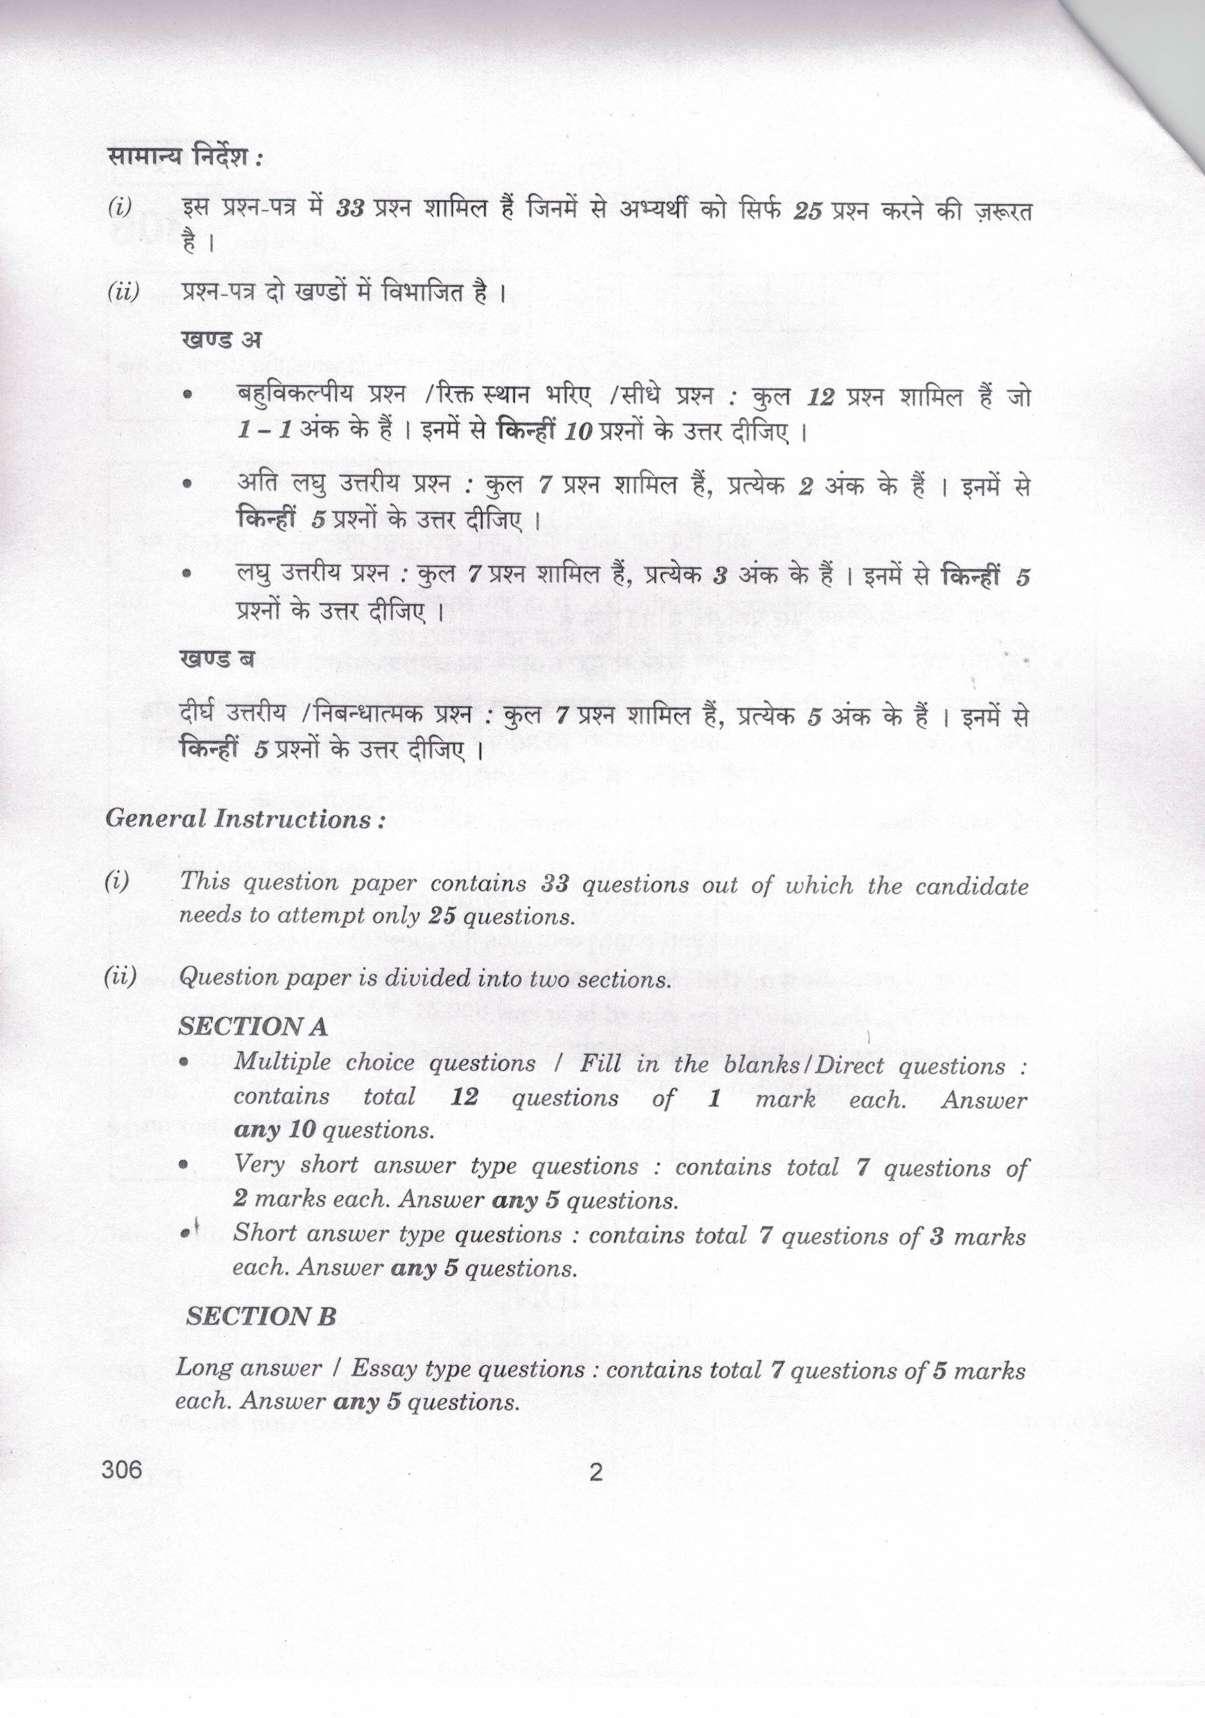 CBSE Class 12 306 Taxation_compressed 2019 Question Paper - Page 2